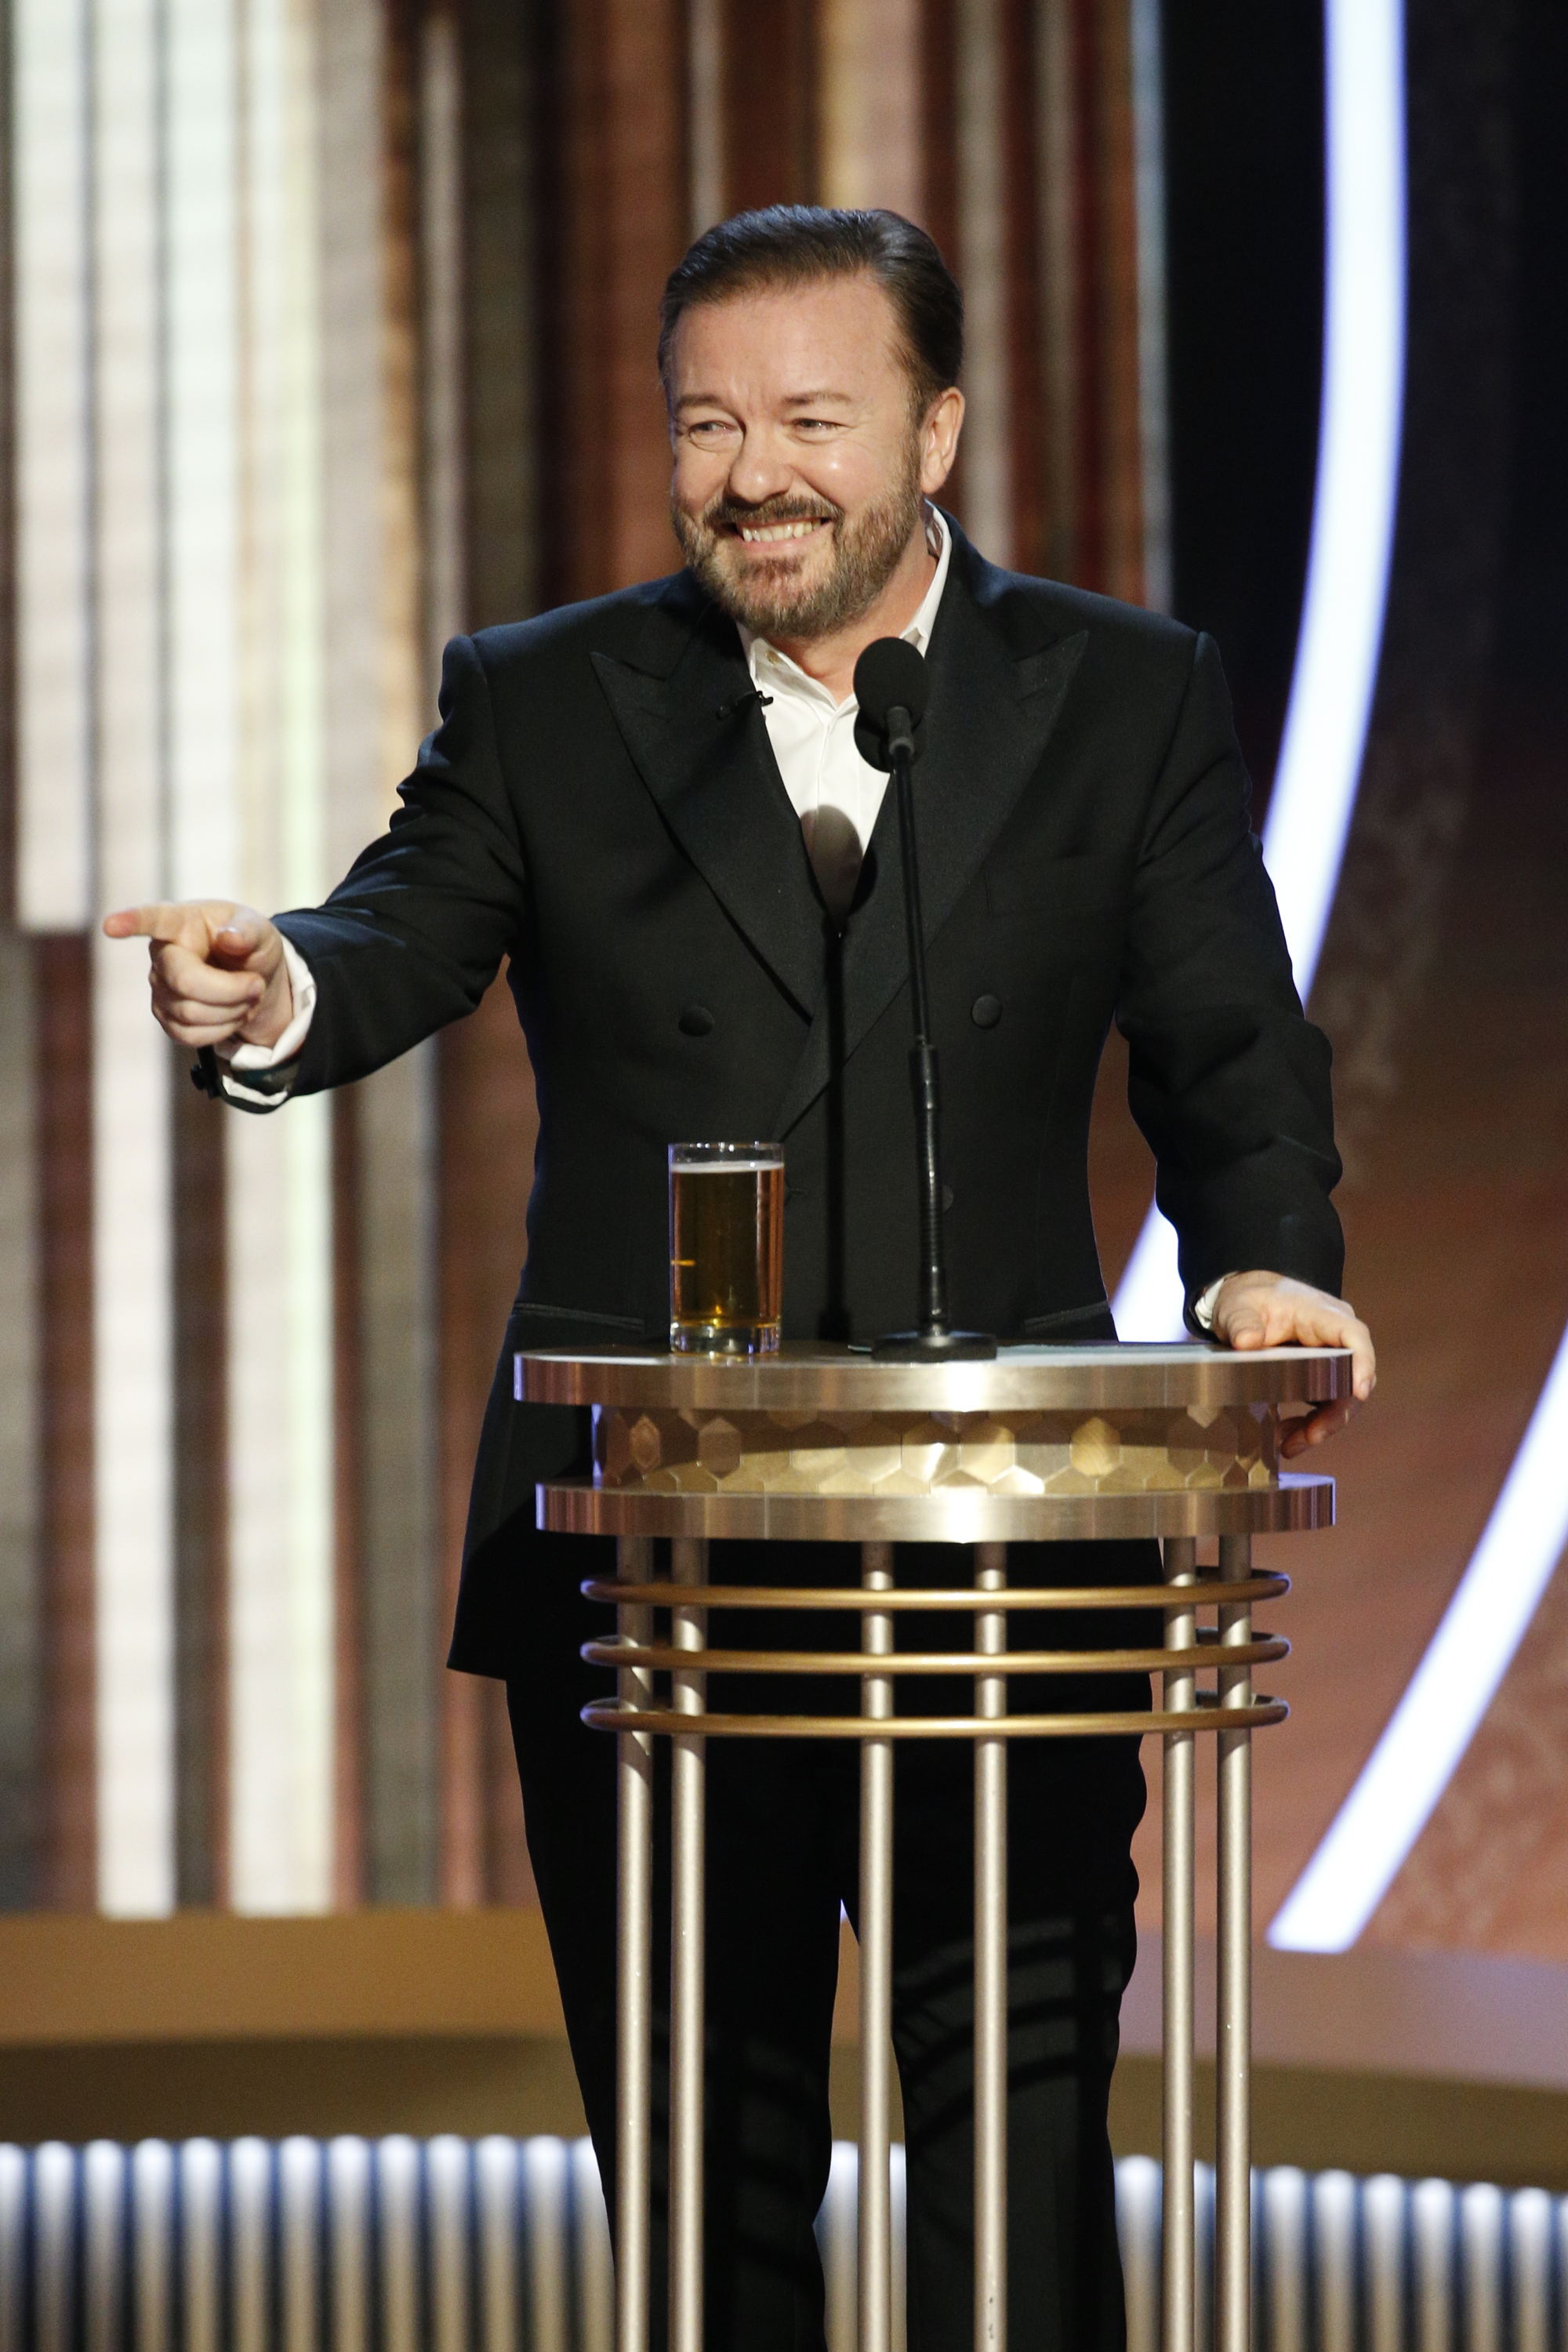 Ricky Gervais speaks onstage during the 77th Annual Golden Globe Awards at The Beverly Hilton Hotel on January 5, 2020, in Beverly Hills, California. | Source: Getty Images